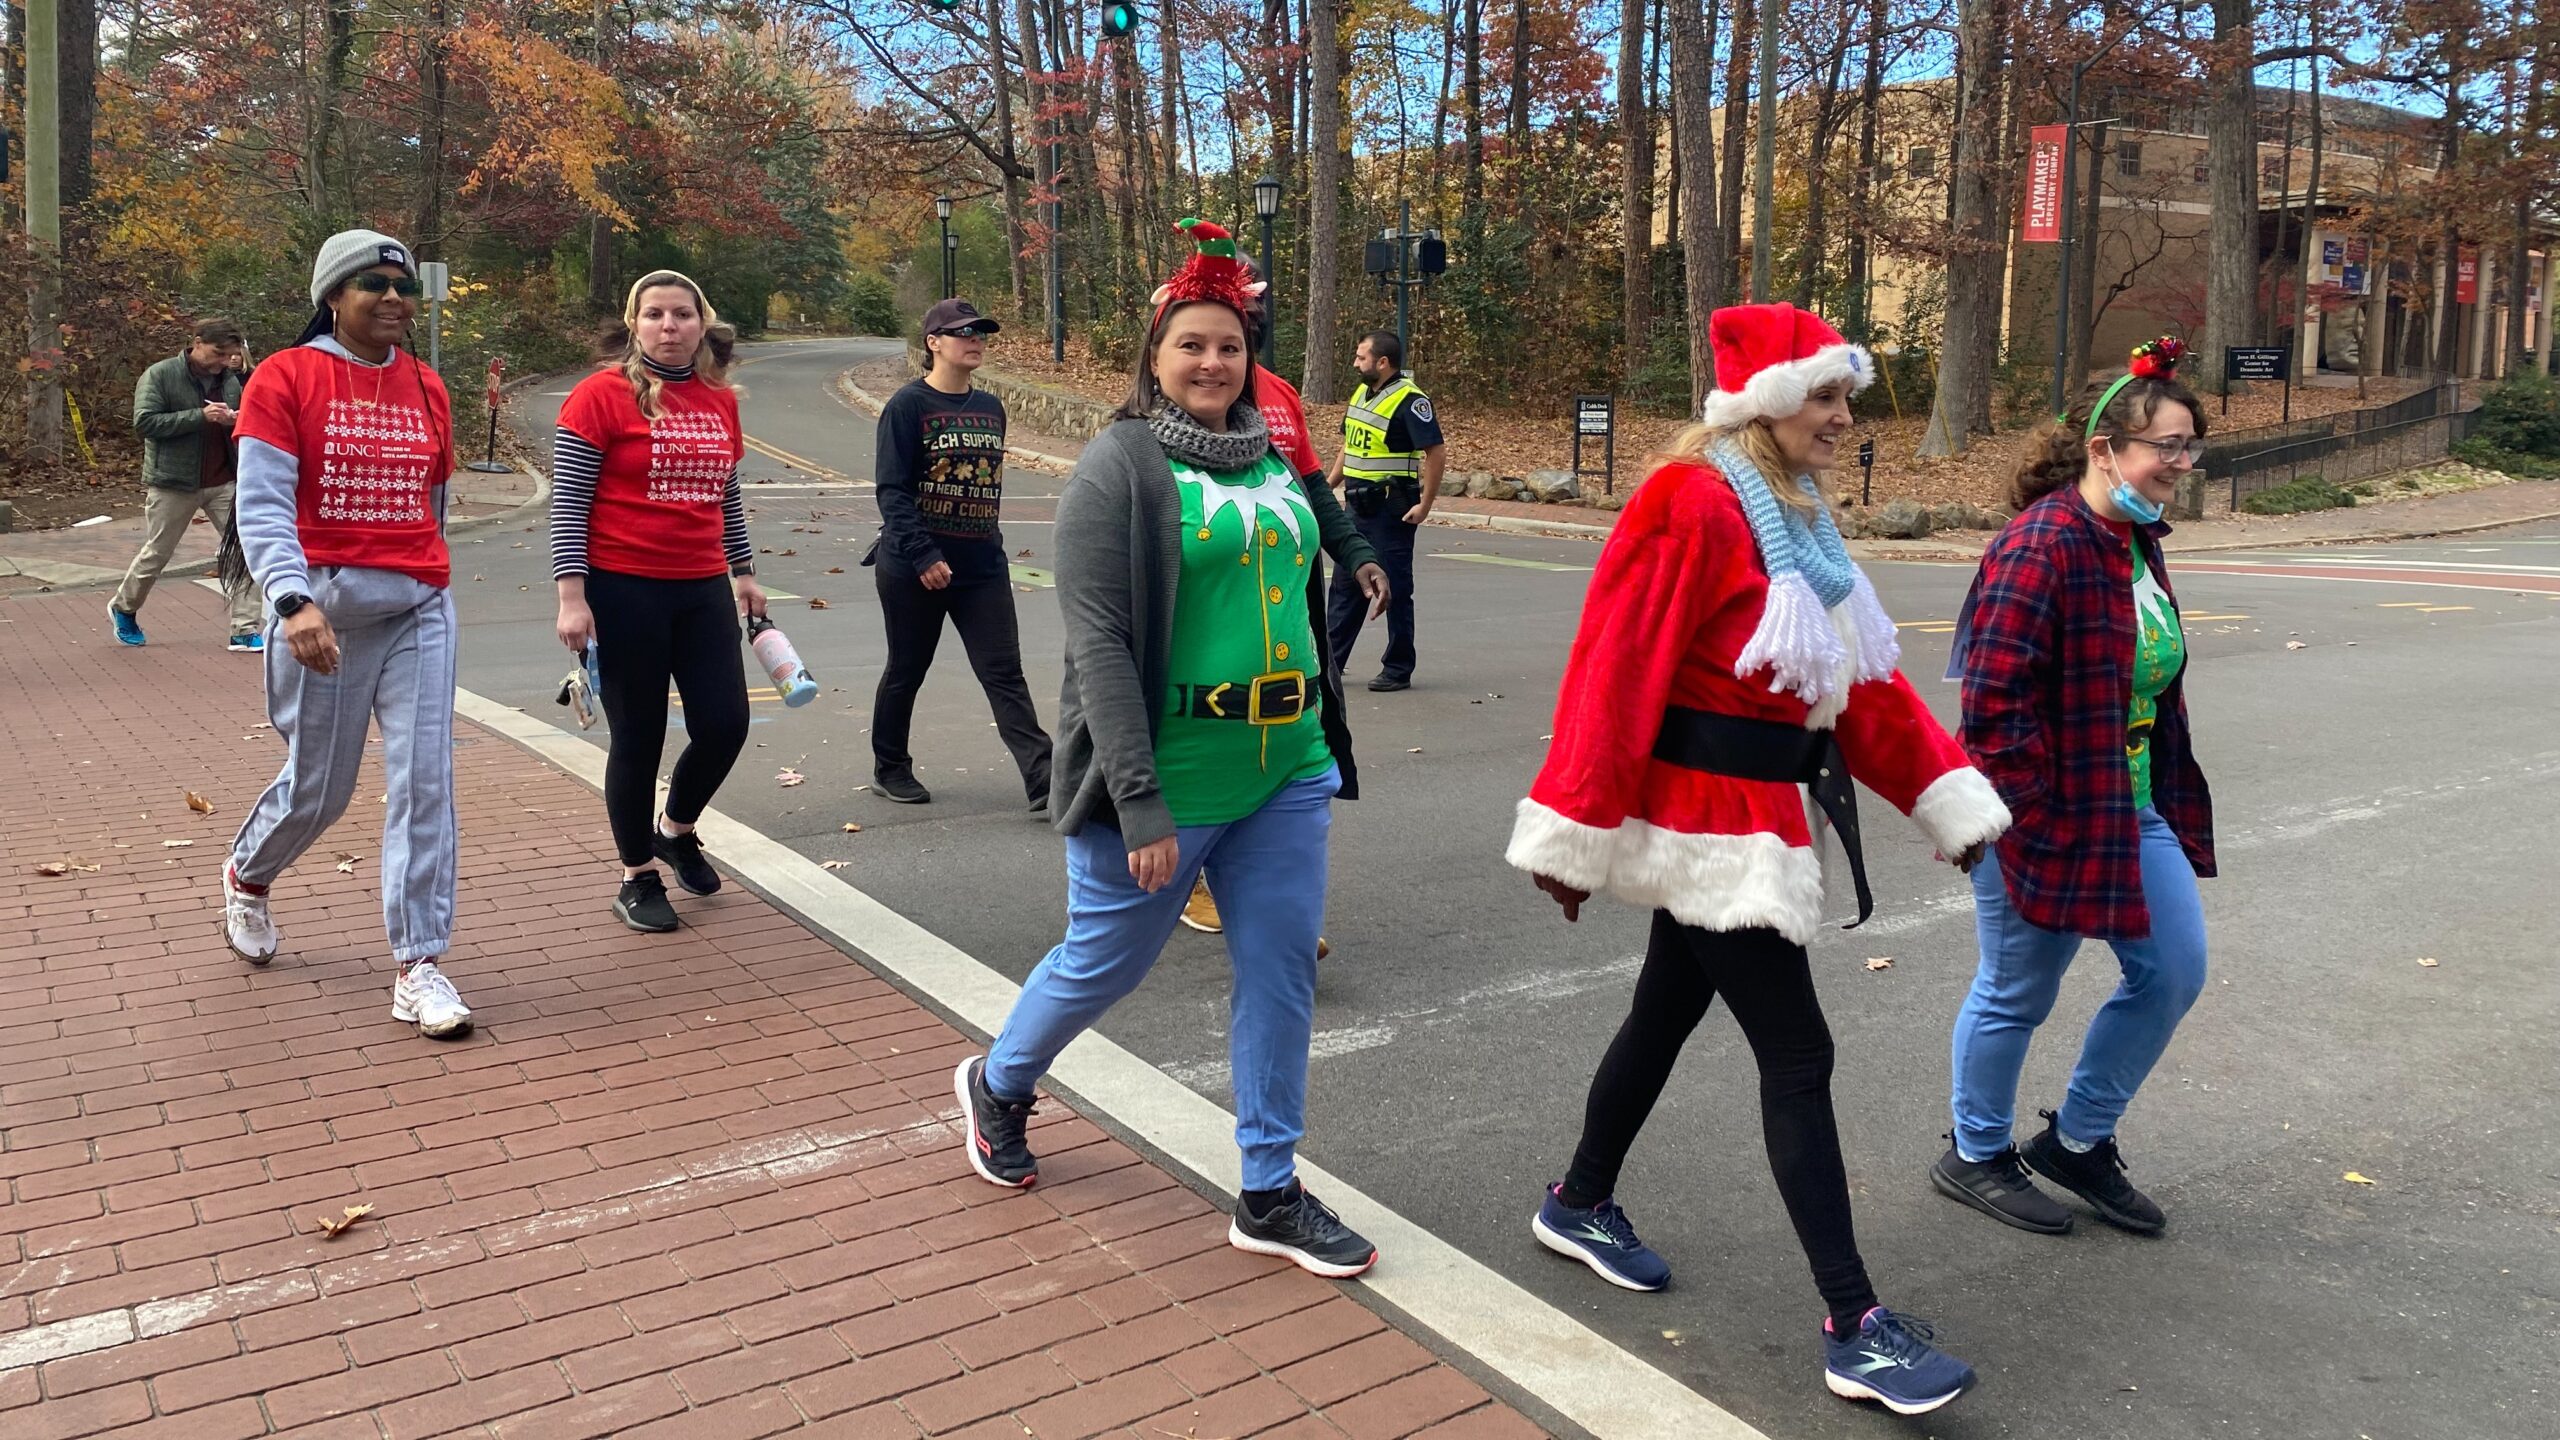 UNC Chapel Hill employees participate in the Jingle Bell Jog 2022 dressed in festive outfits